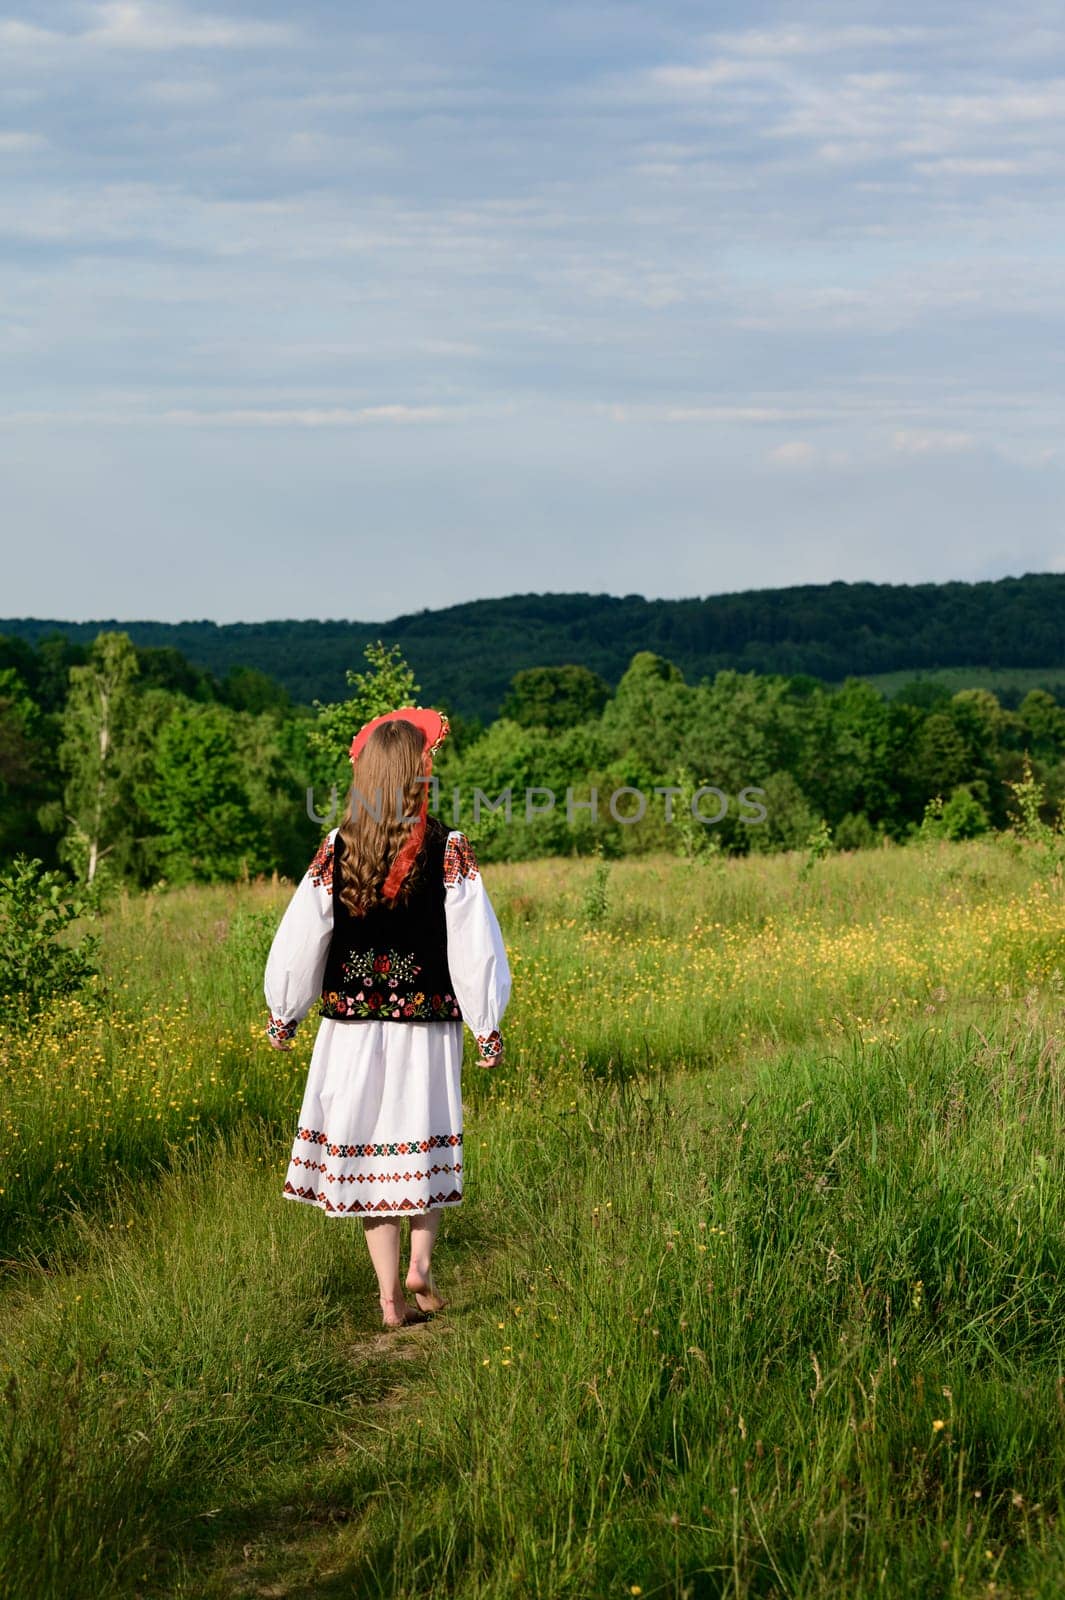 The girl, with her back turned and dressed in Ukrainian national clothes, walks barefoot in the field, wearing a wreath with ribbons on her head.